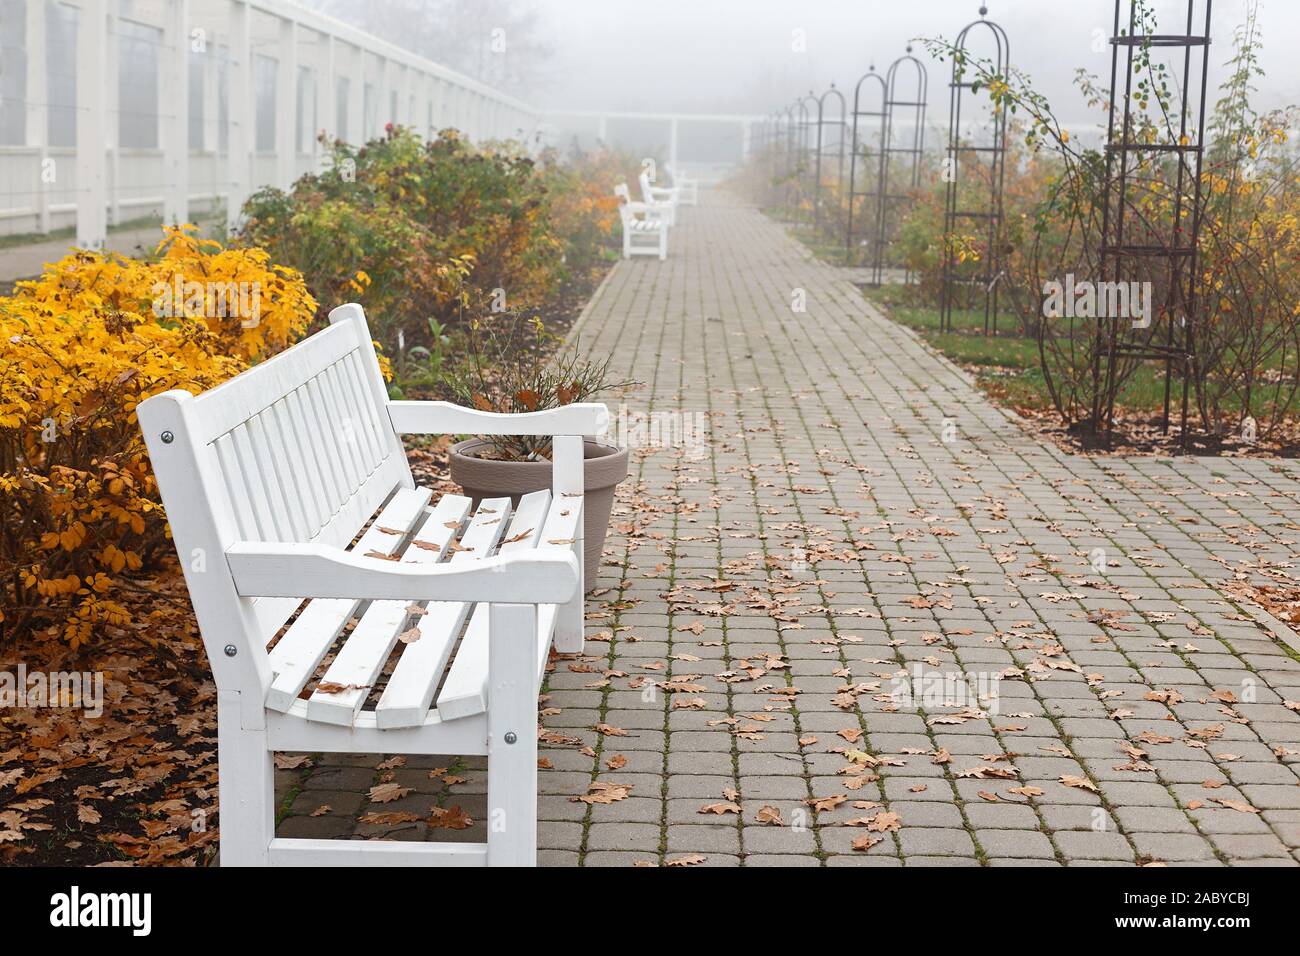 Misty November day in a botanical garden. Muted colors of autumn. Stock Photo